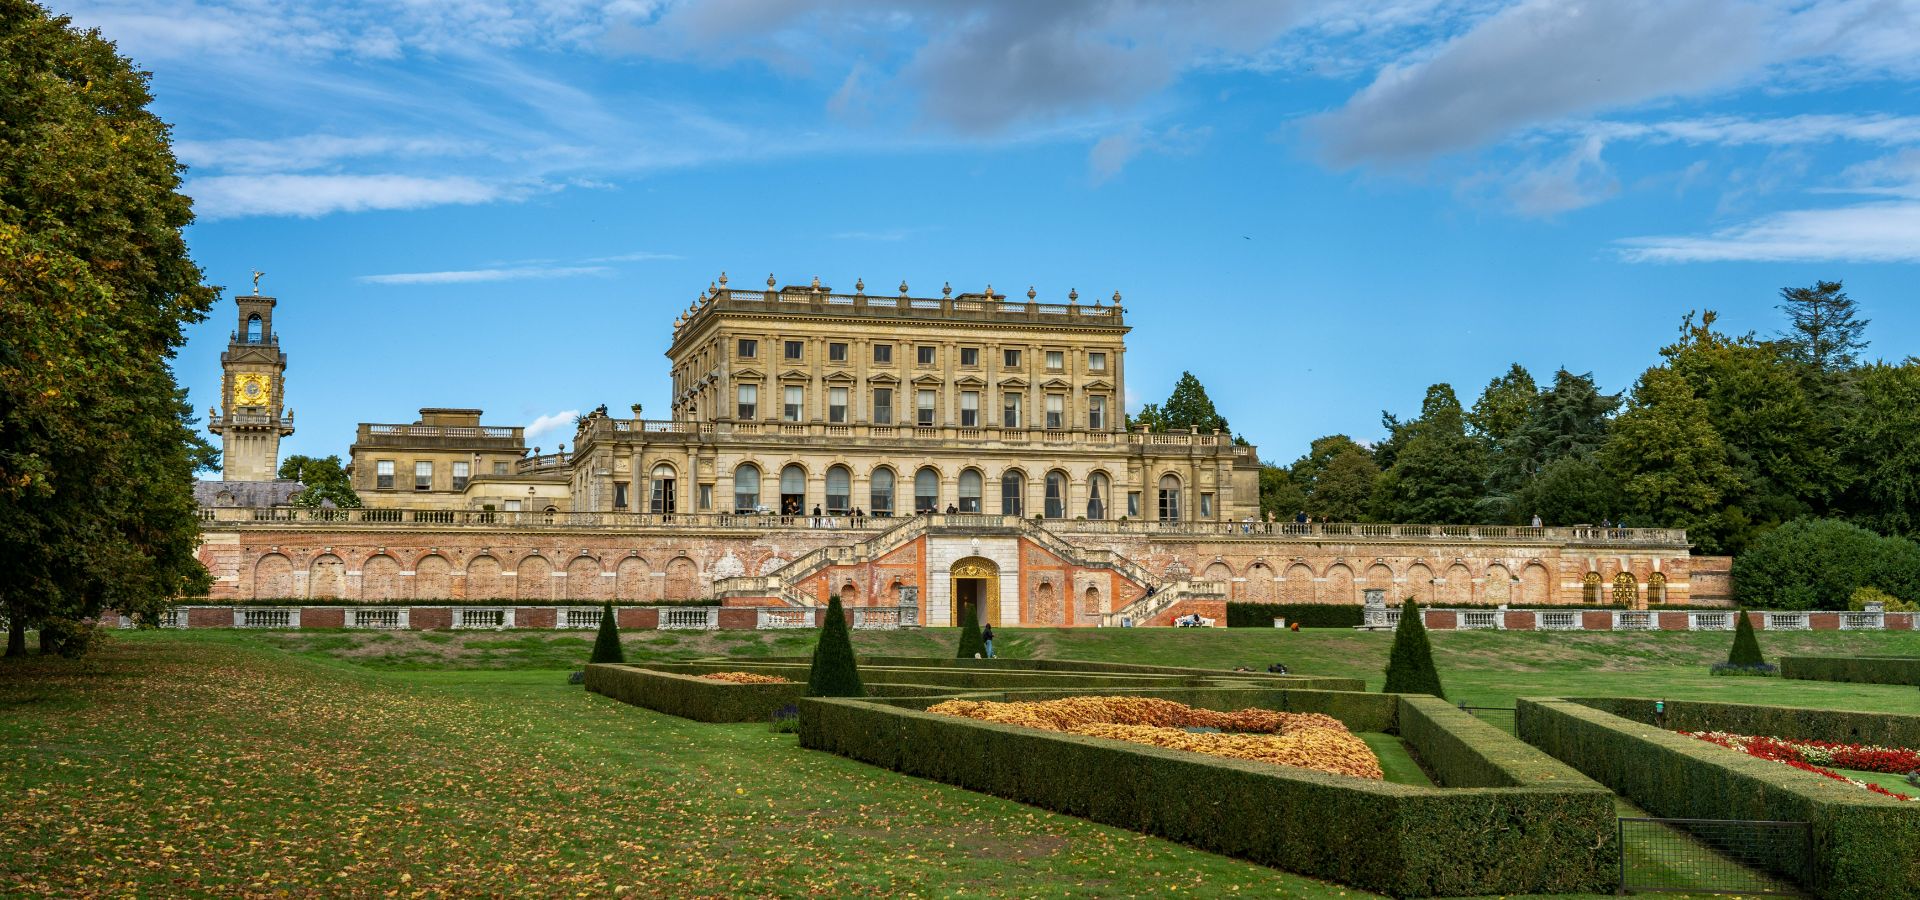 photo of cliveden